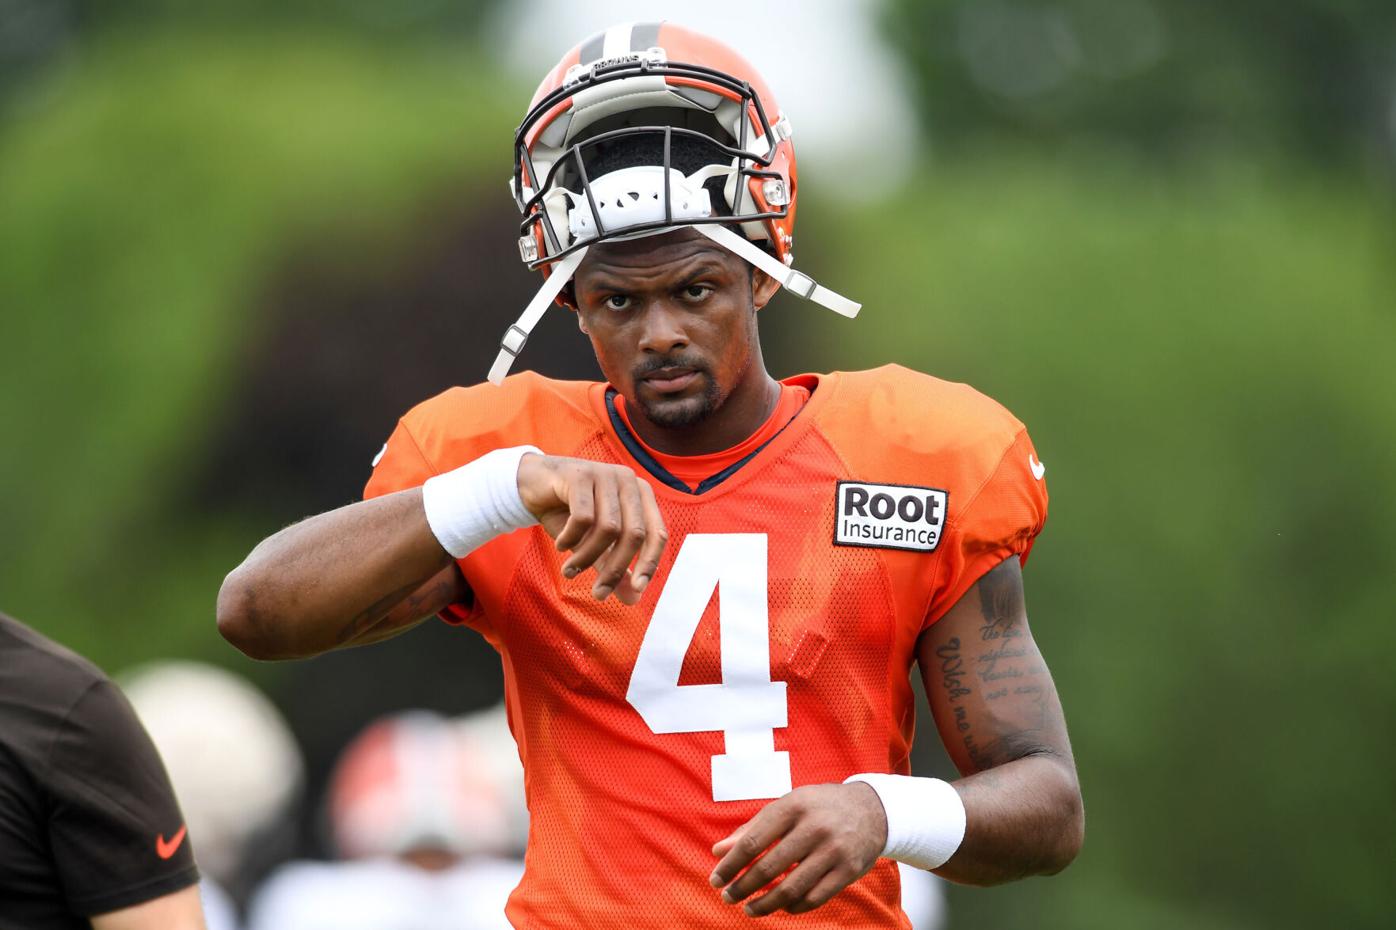 Cleveland Browns QB Deshaun Watson suspended 11 games, fined $5